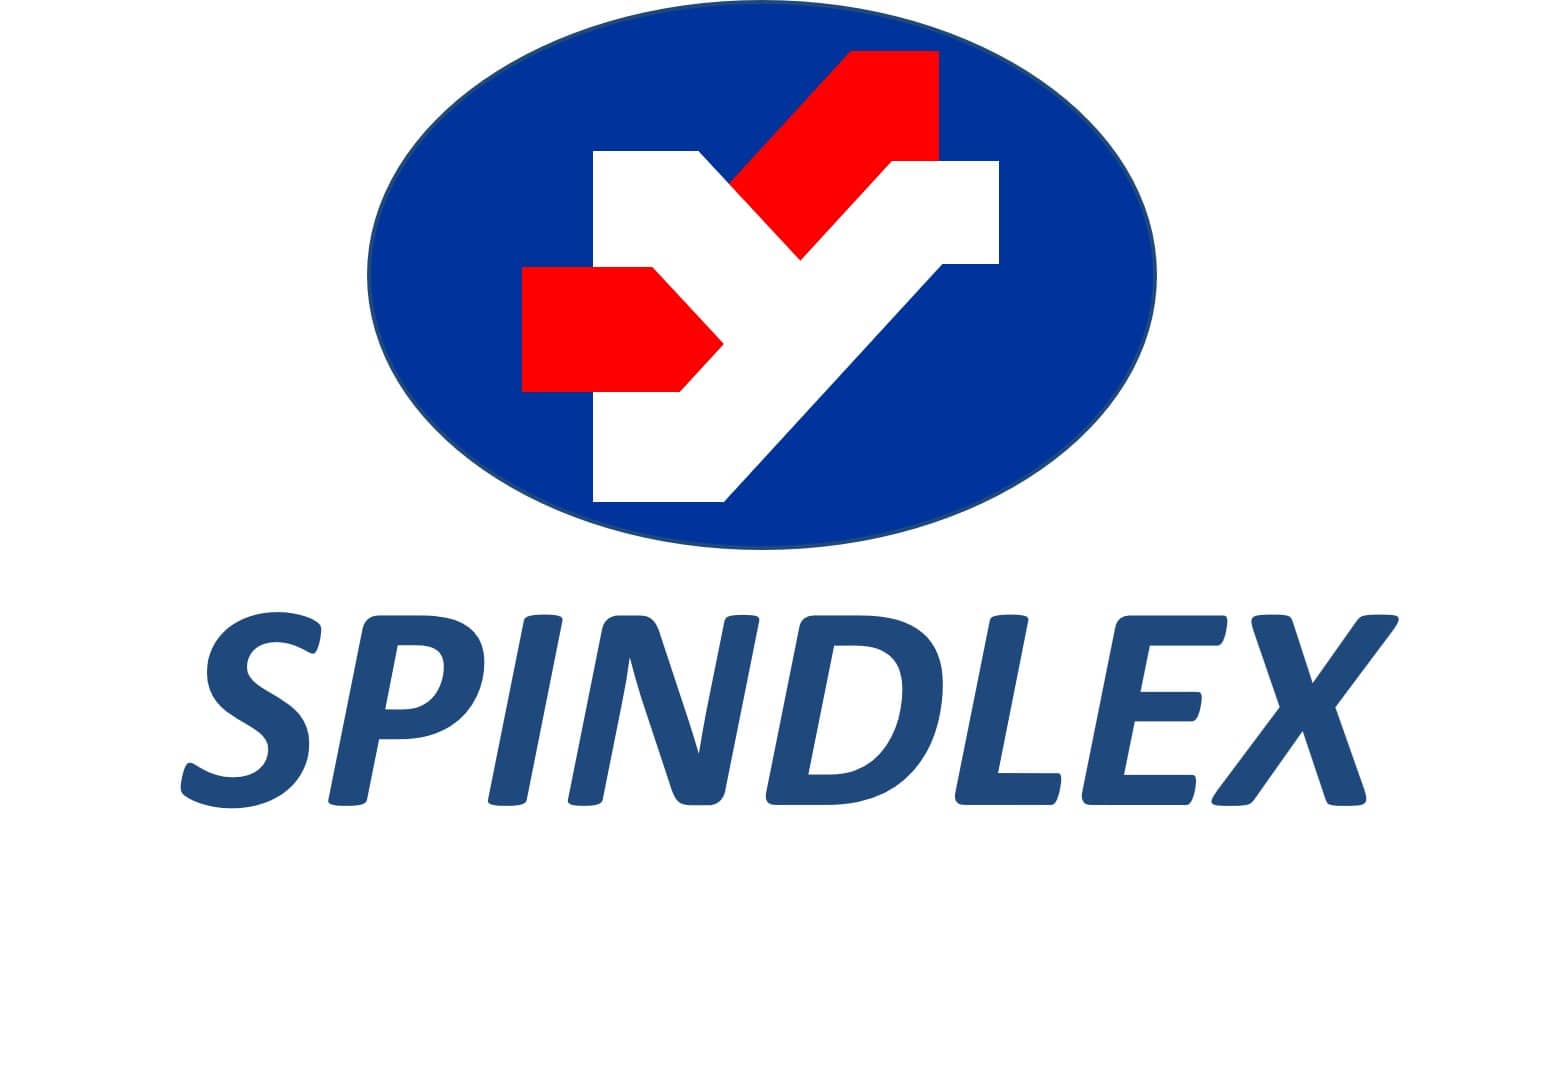 About|SPINDLEX TECHNOLOGIES CO., LTD